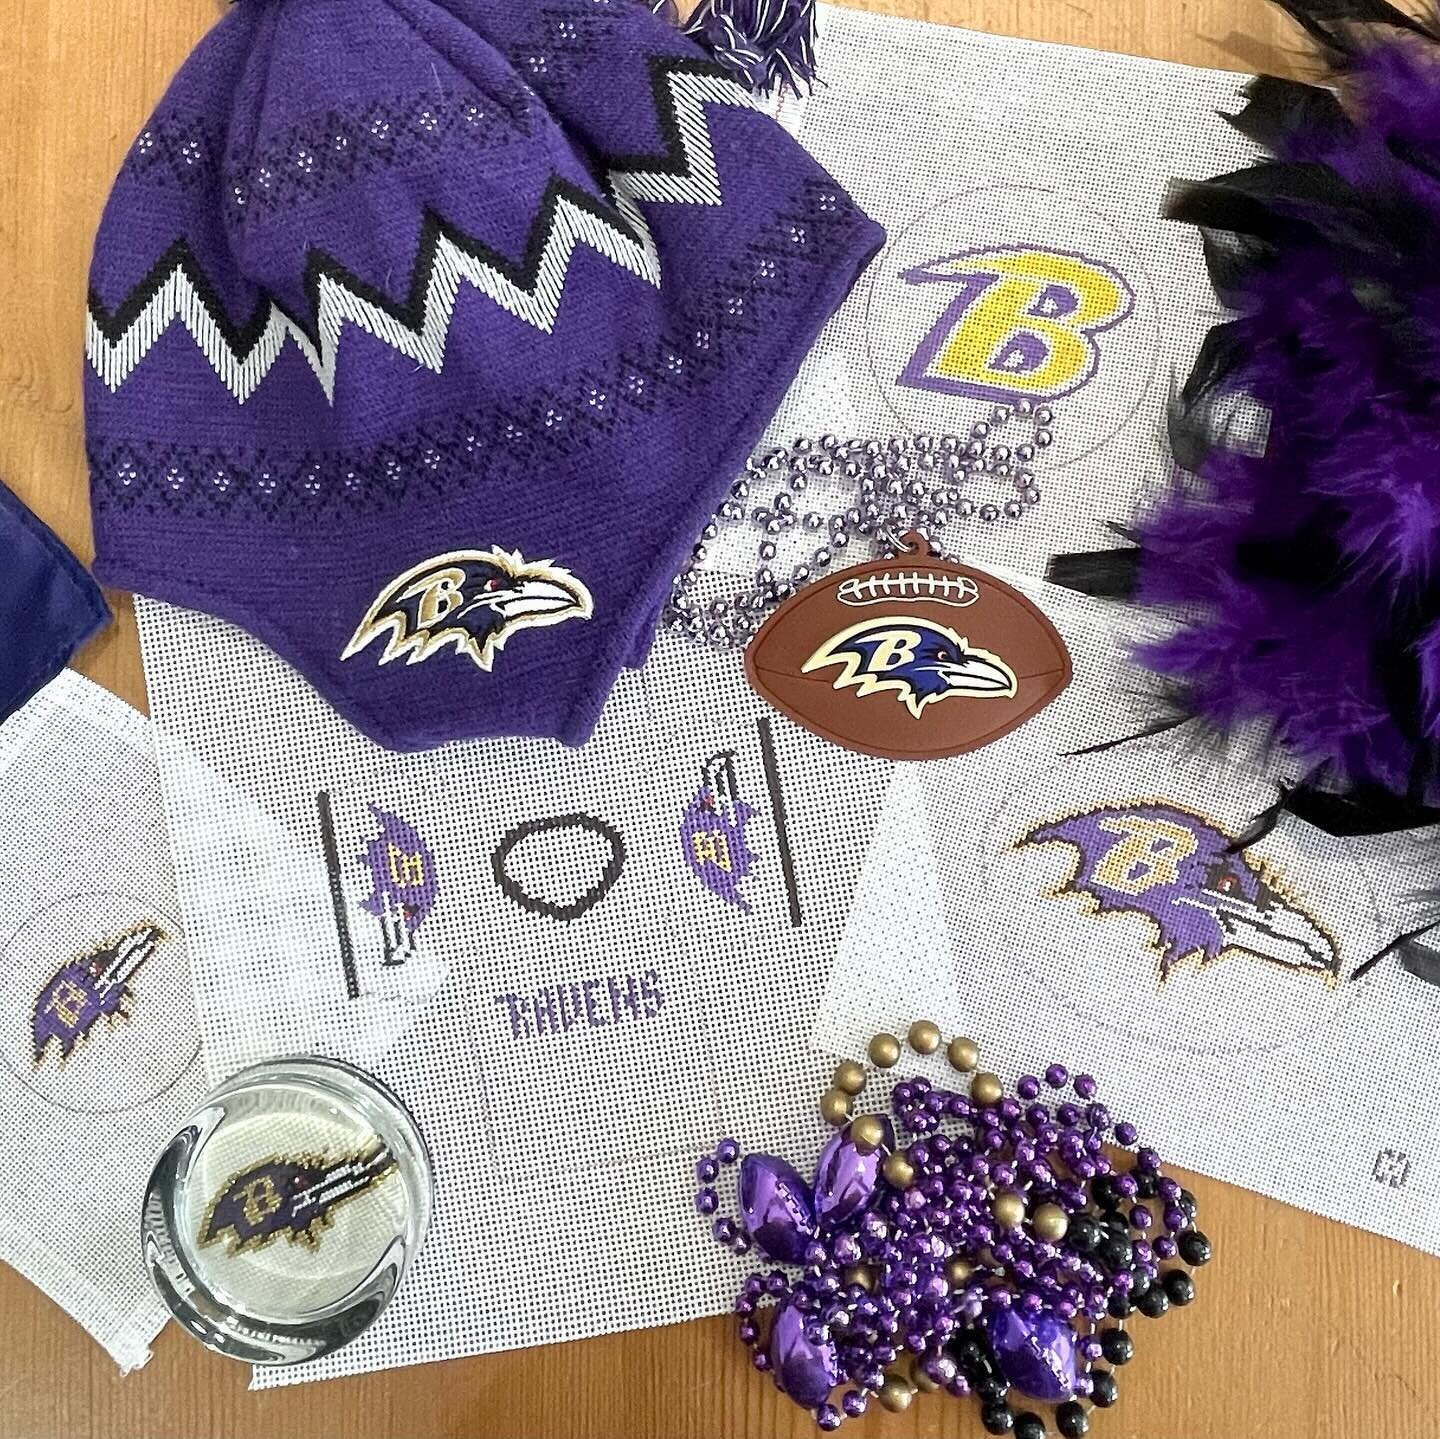 We&rsquo;re ready to cheer on the Baltimore Ravens tomorrow! Now we just need to decide which canvas to stitch during the game 🤔